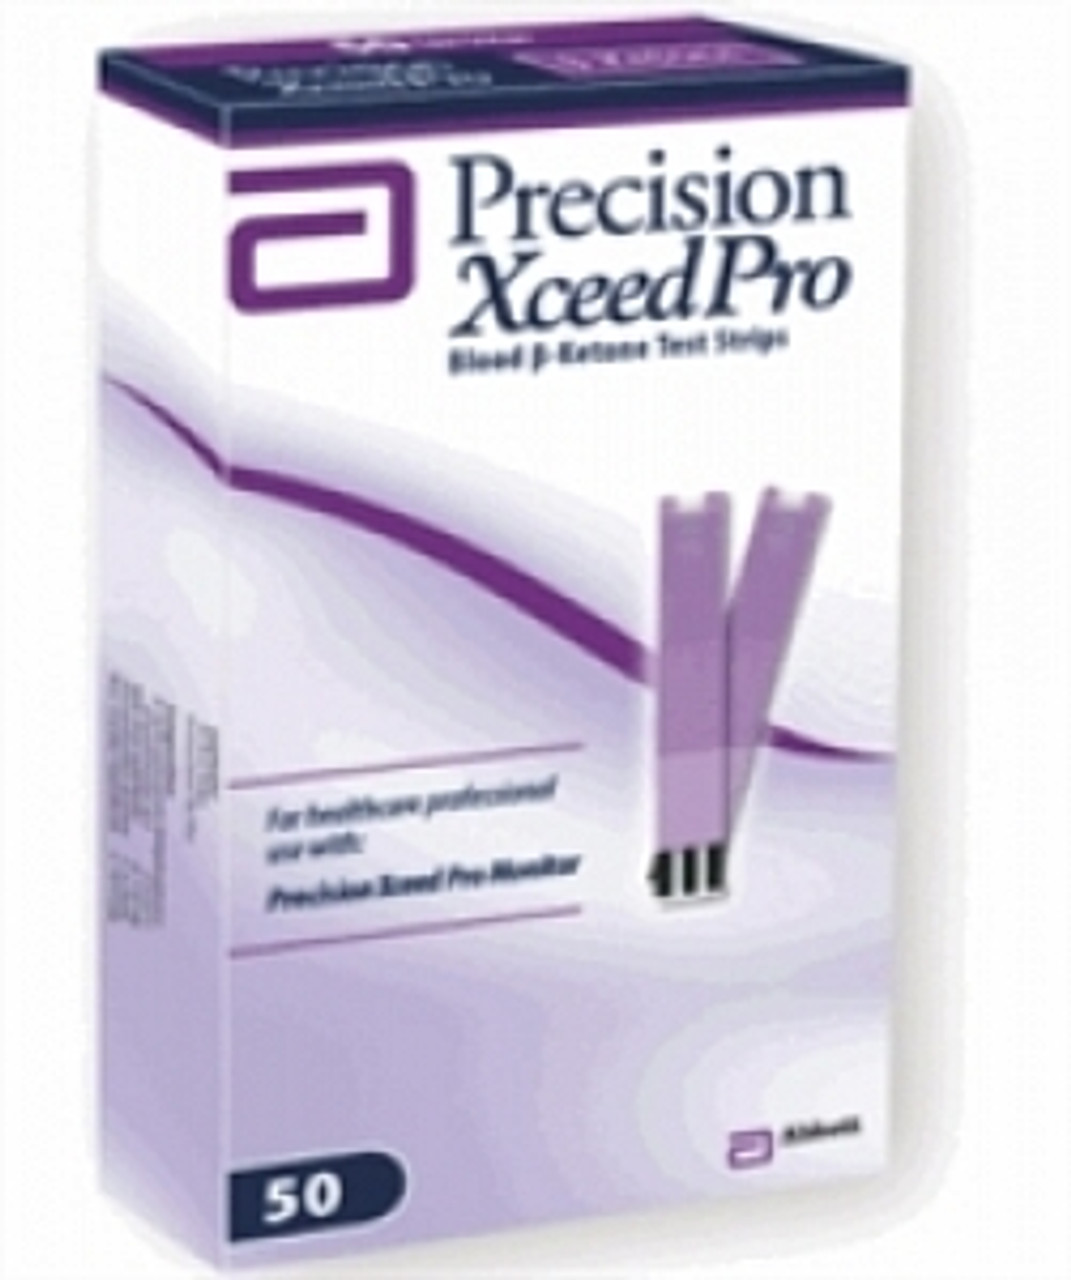 Precision Xceed Pro Blood Glucose Test Strips by Medline